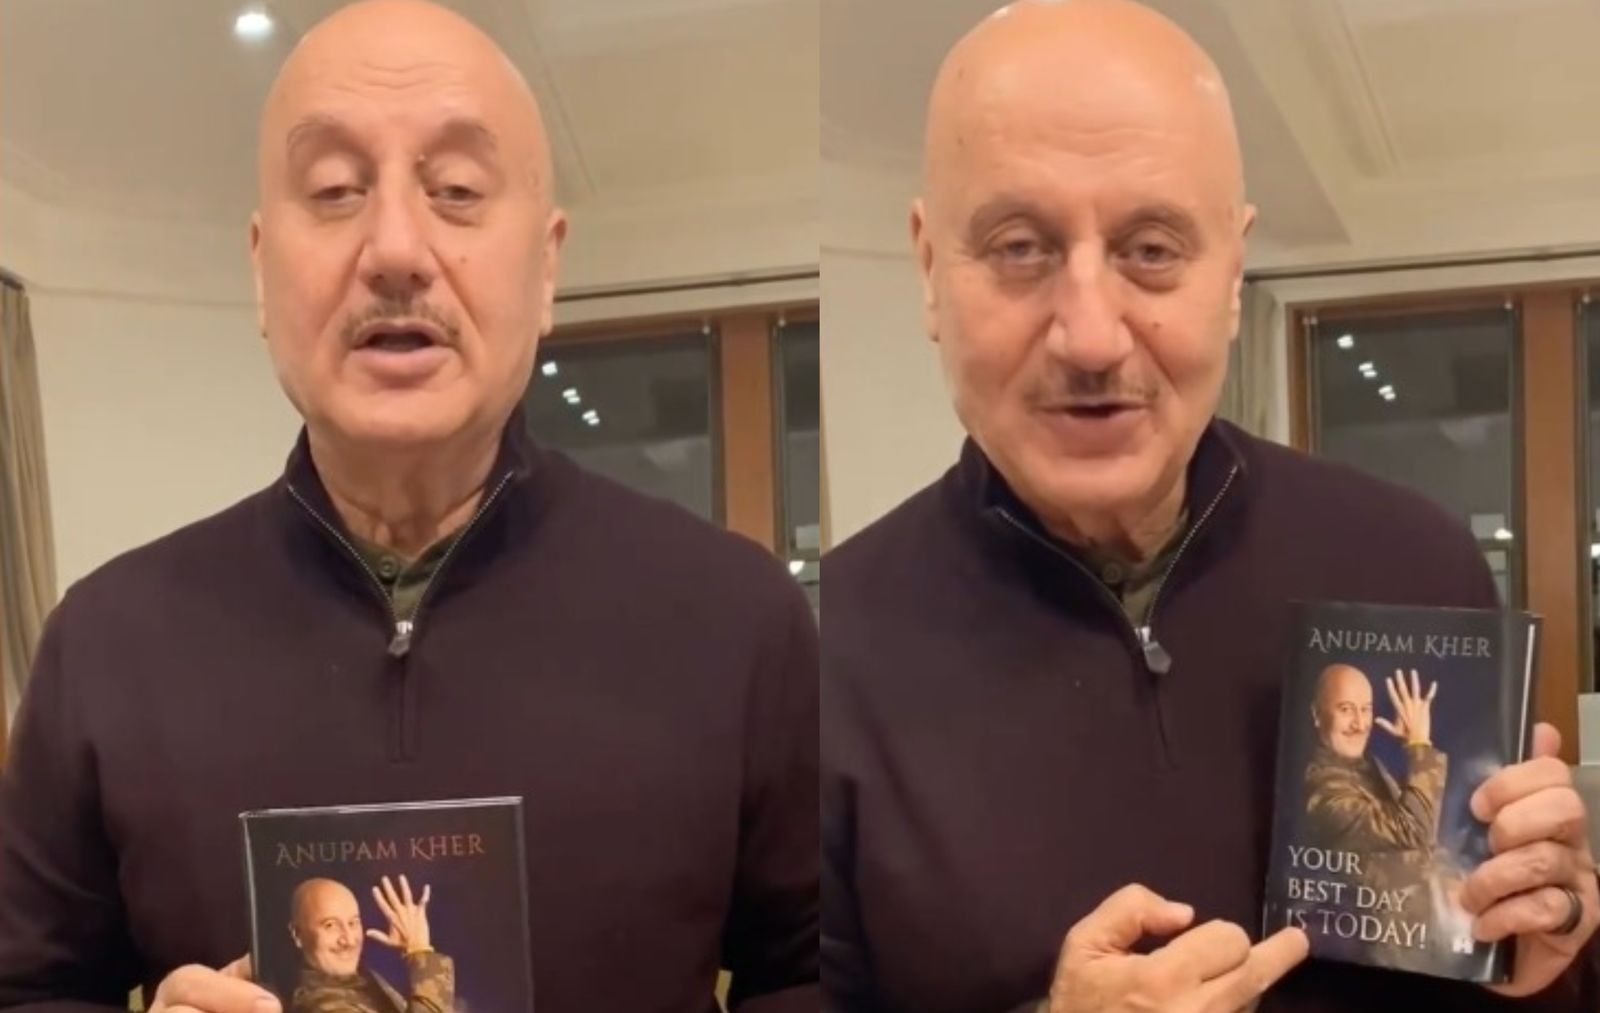 Anupam Kher Introduces His Third Book Titled ‘Your Best Day Is Today’; Calls It His Third Baby As An Author